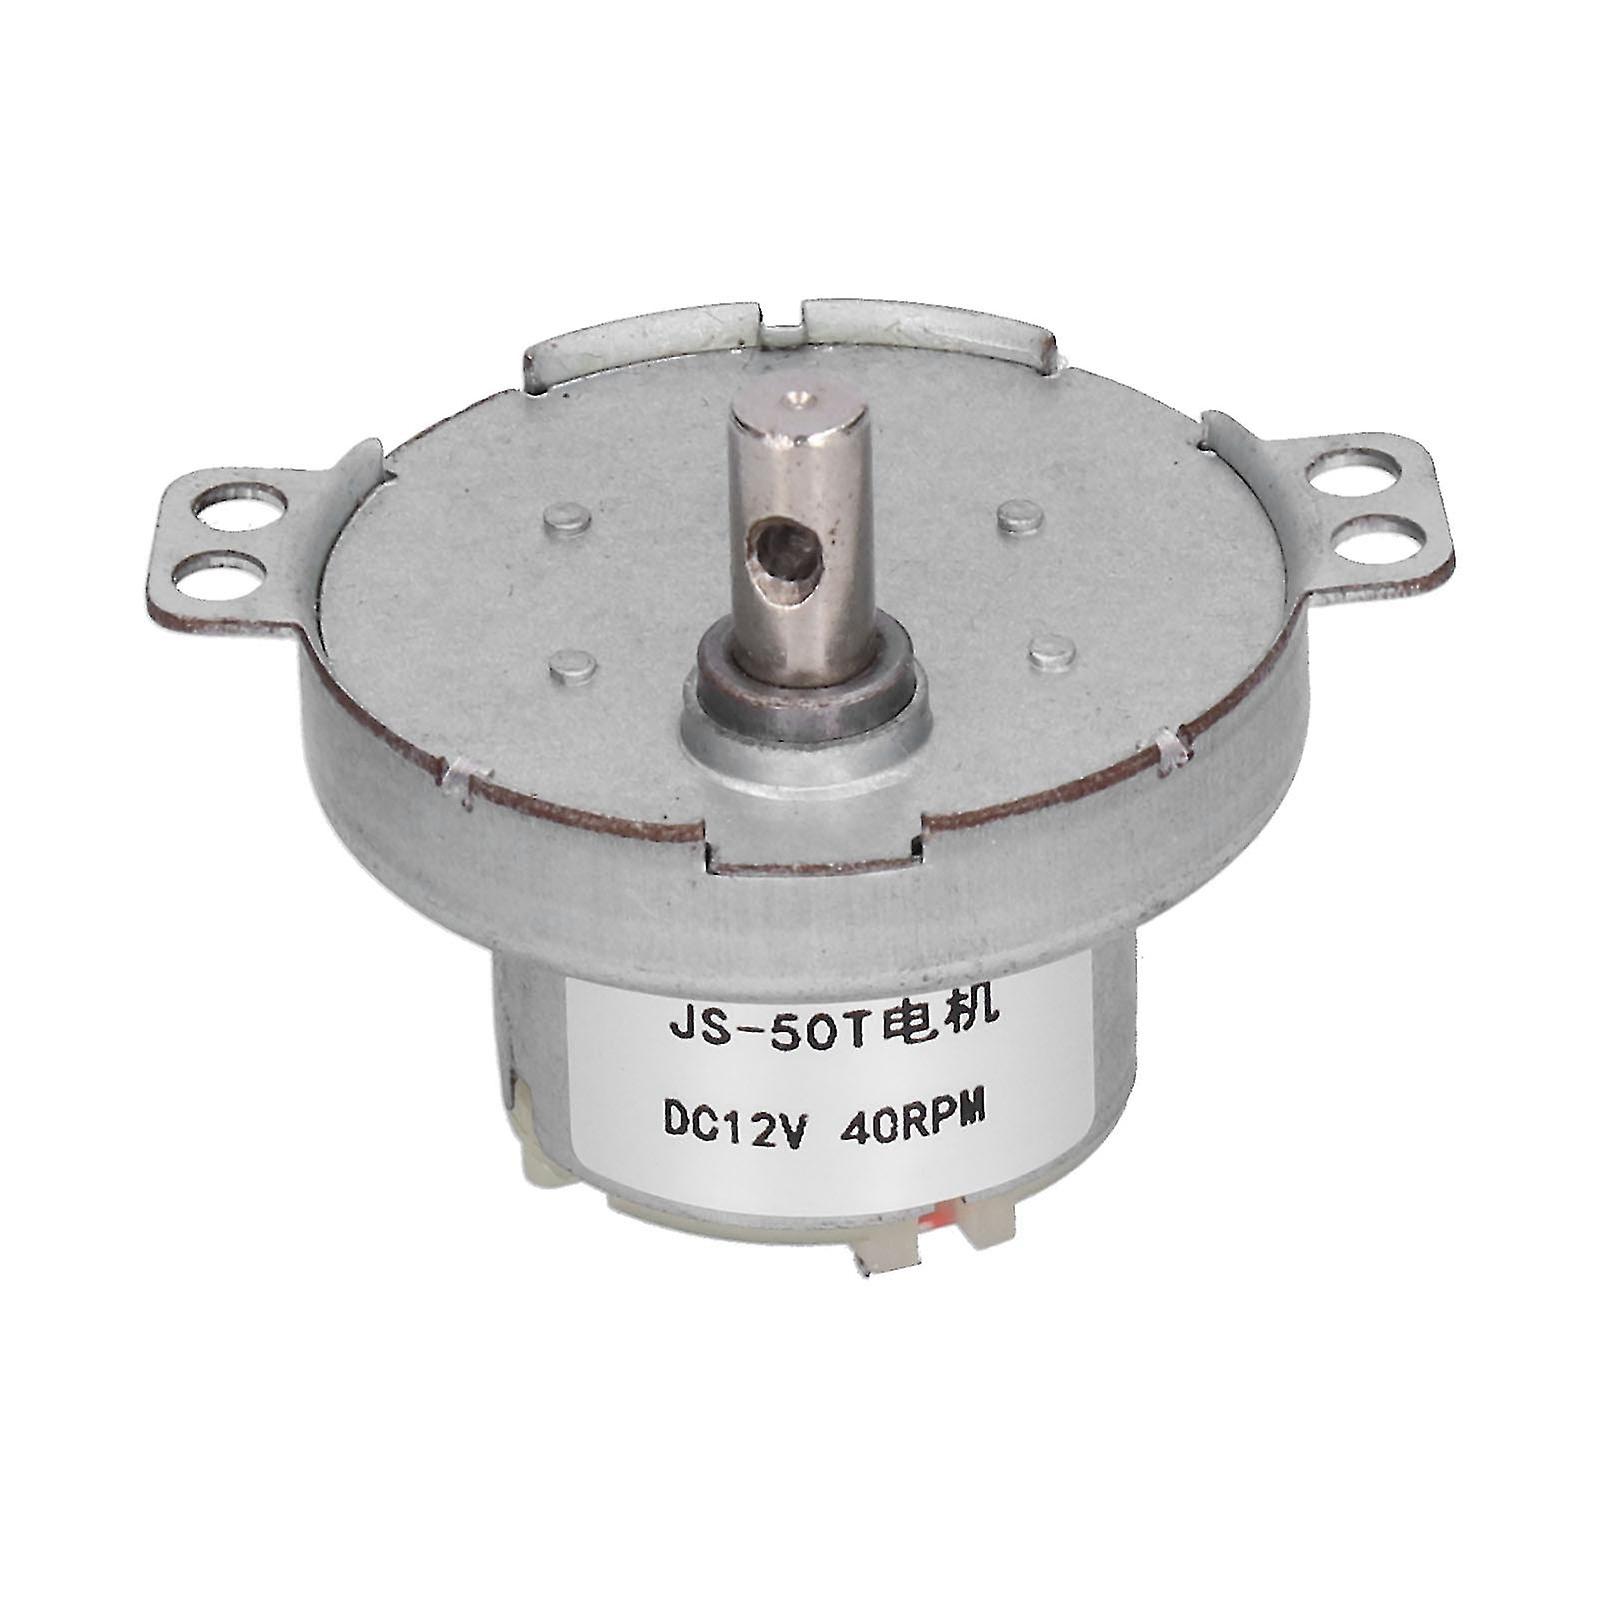 Gear Motor Reduction Geared Box Equipment Industrial Control Supplies 40RPM DC12V JS‑50T